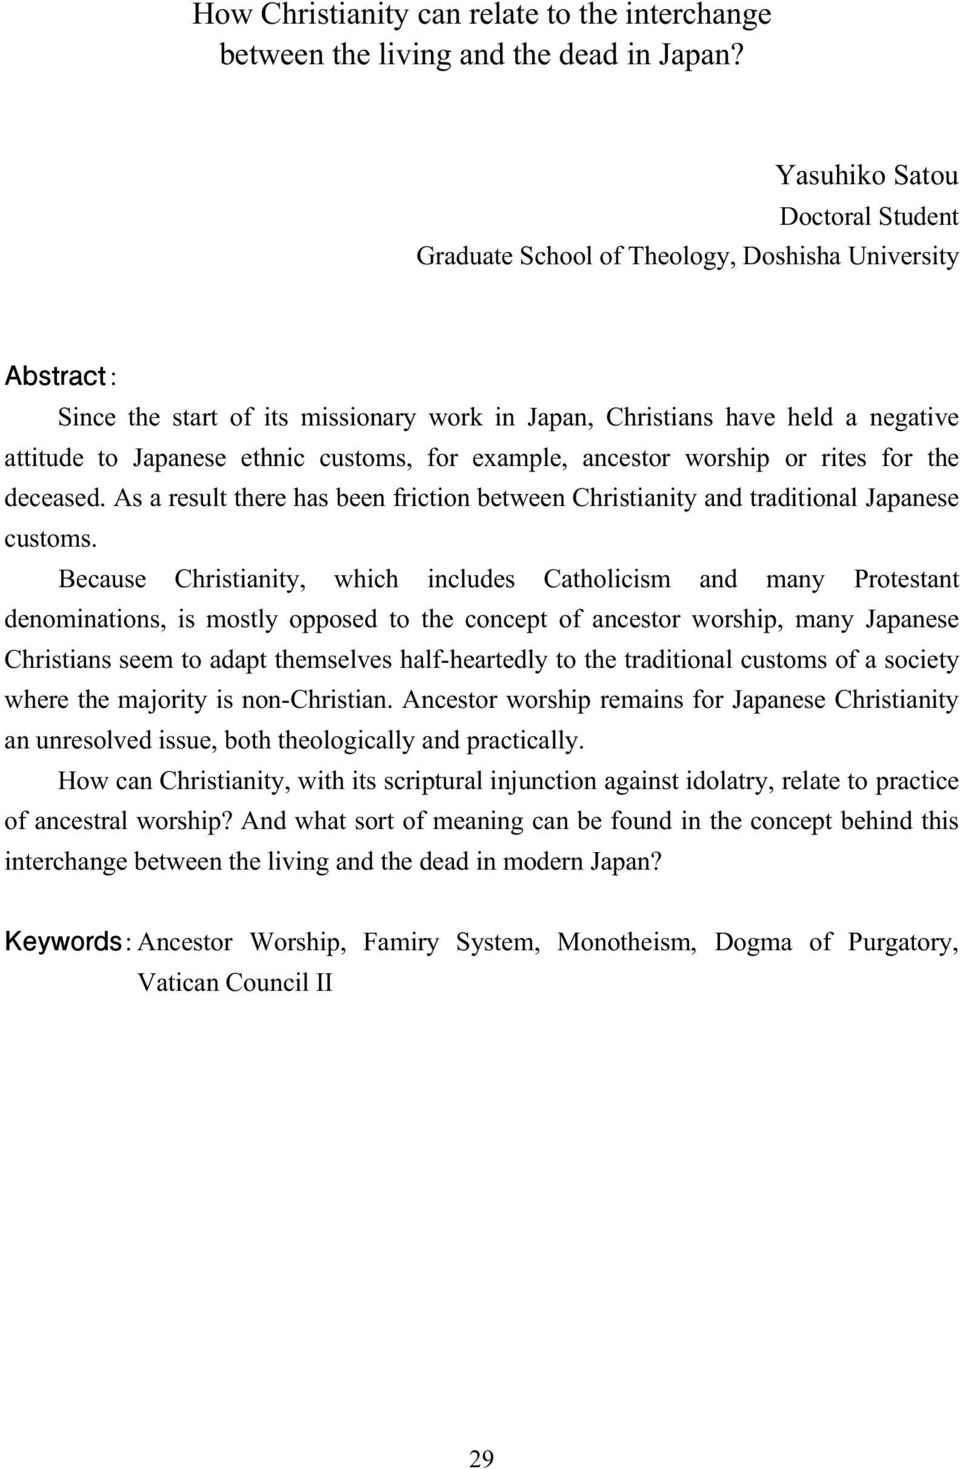 customs, for example, ancestor worship or rites for the deceased. As a result there has been friction between Christianity and traditional Japanese customs.